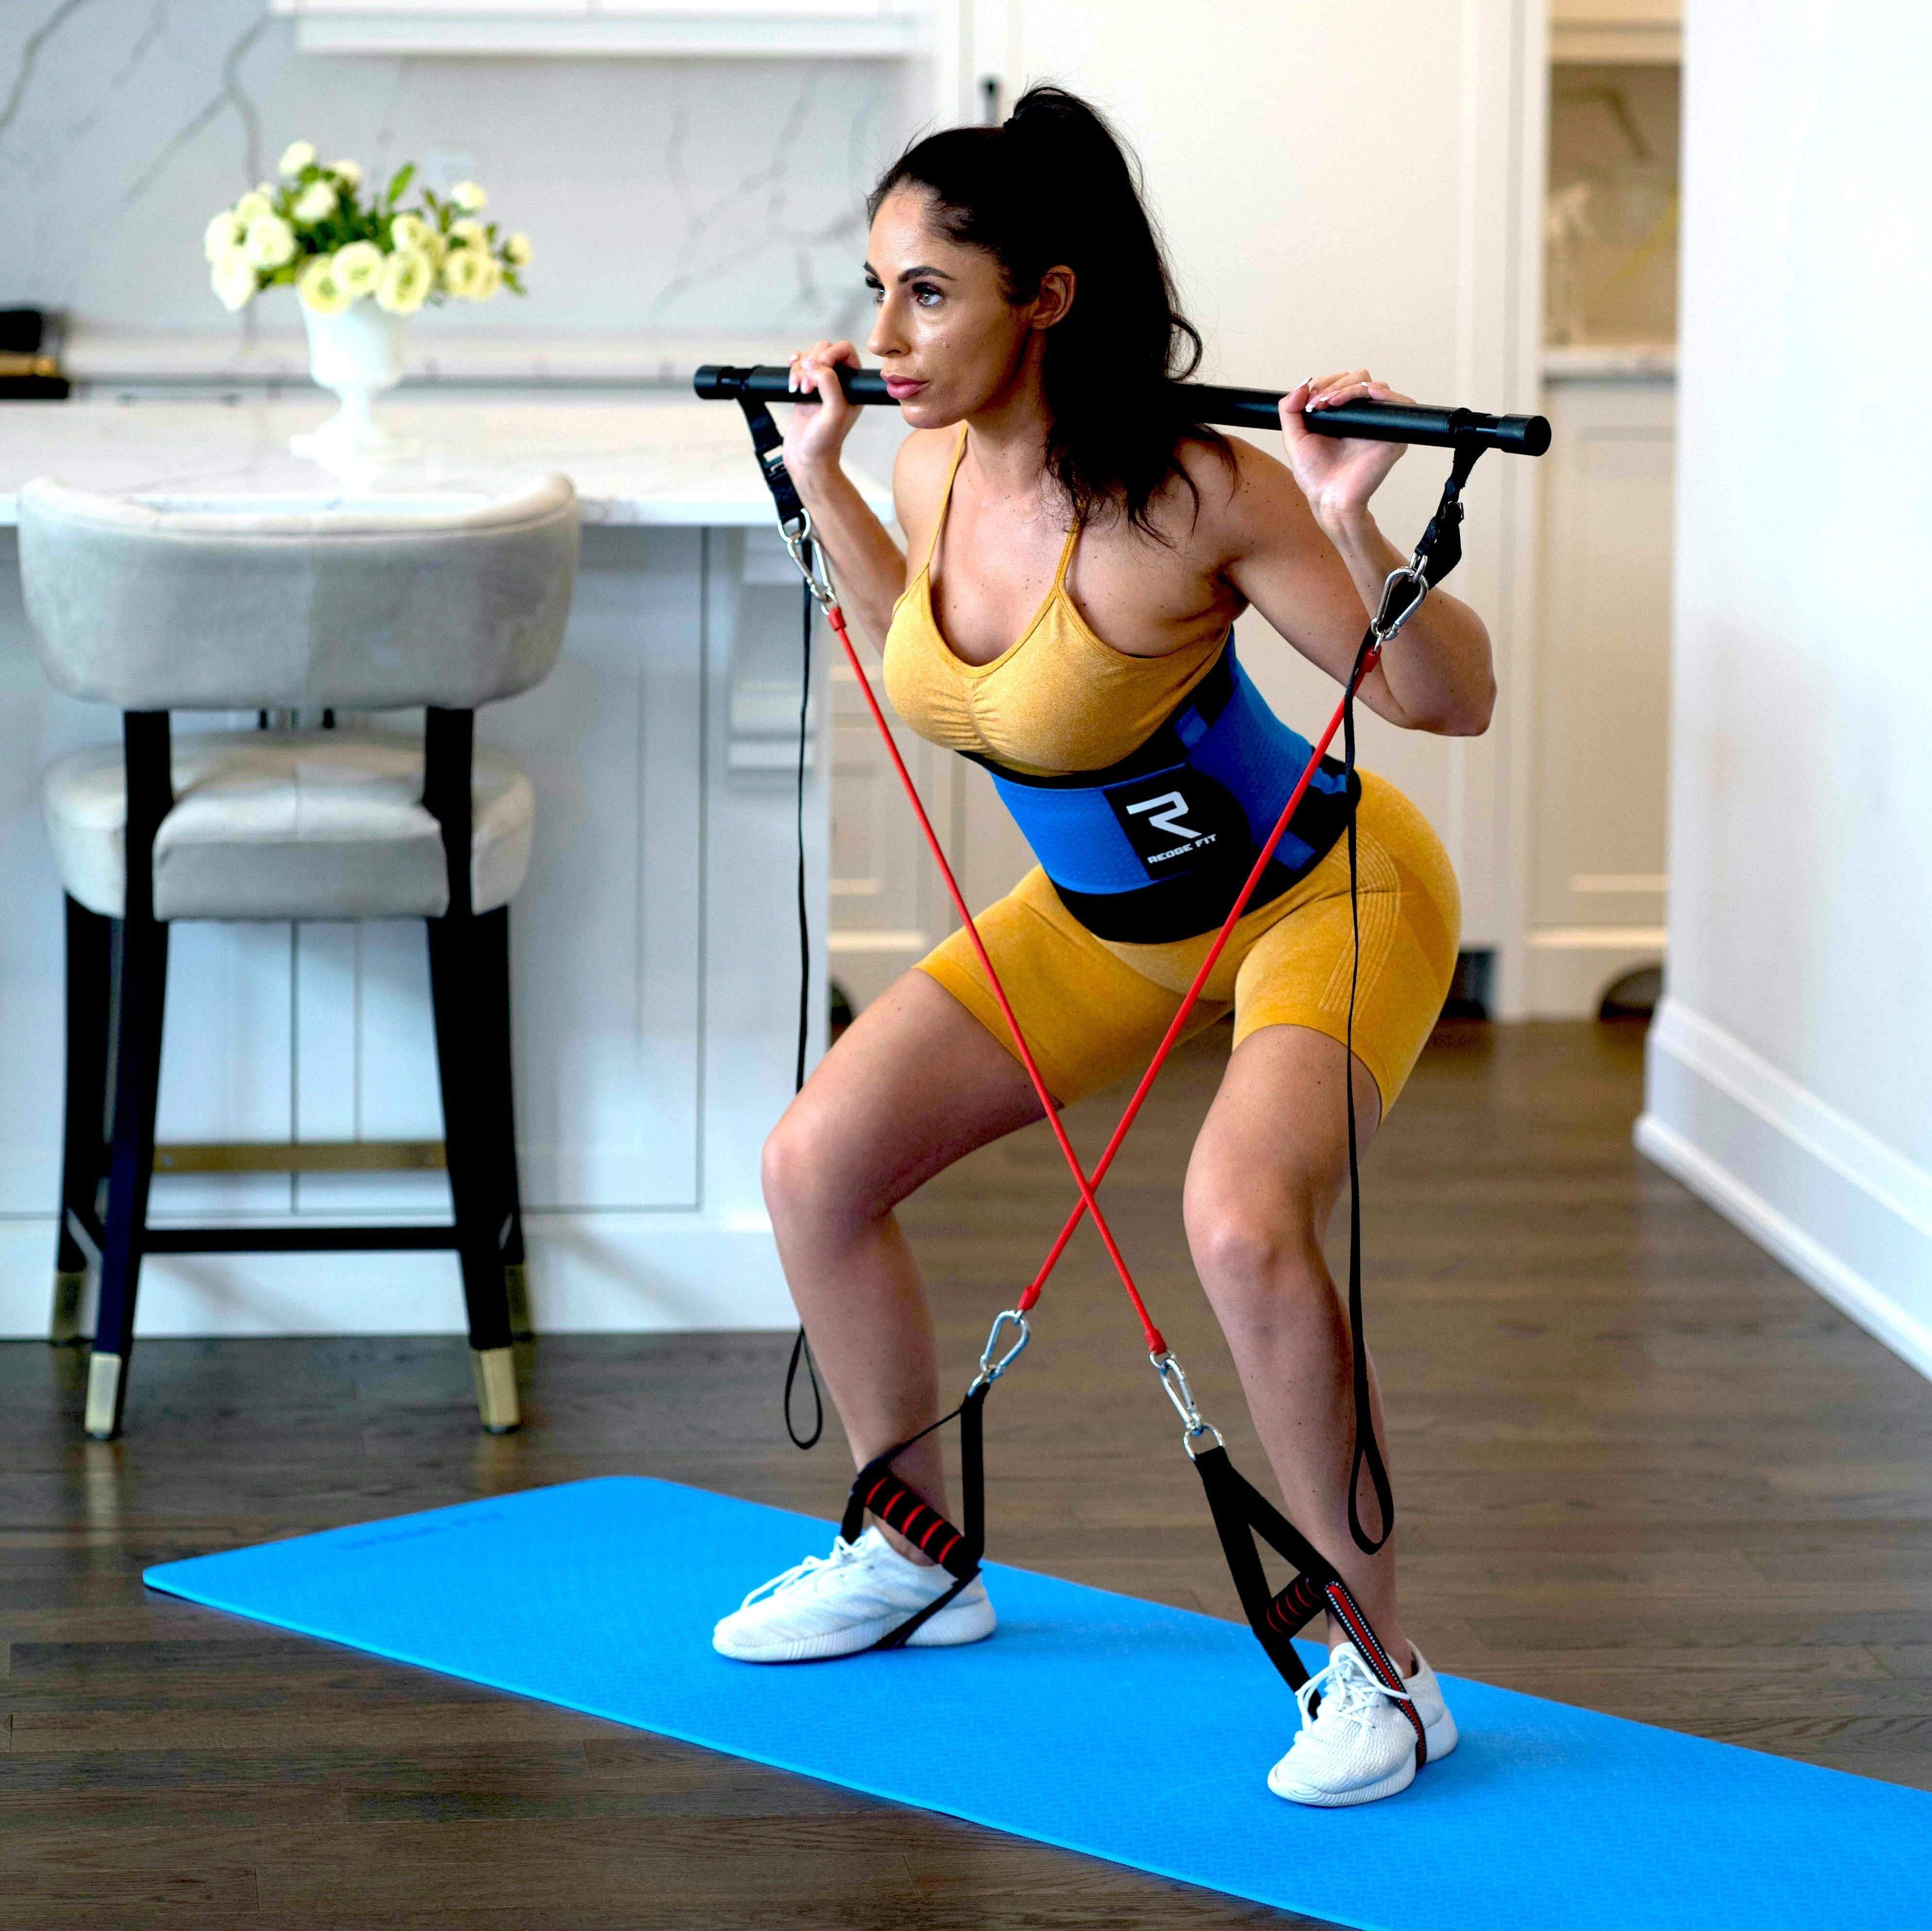 Woman modeling the Redge Fit Full Body Starter Pack Portable Gym Machine and Yoga Mat Available at https://www.getredge.com/products/copy-of-full-body--all-in-one-pack